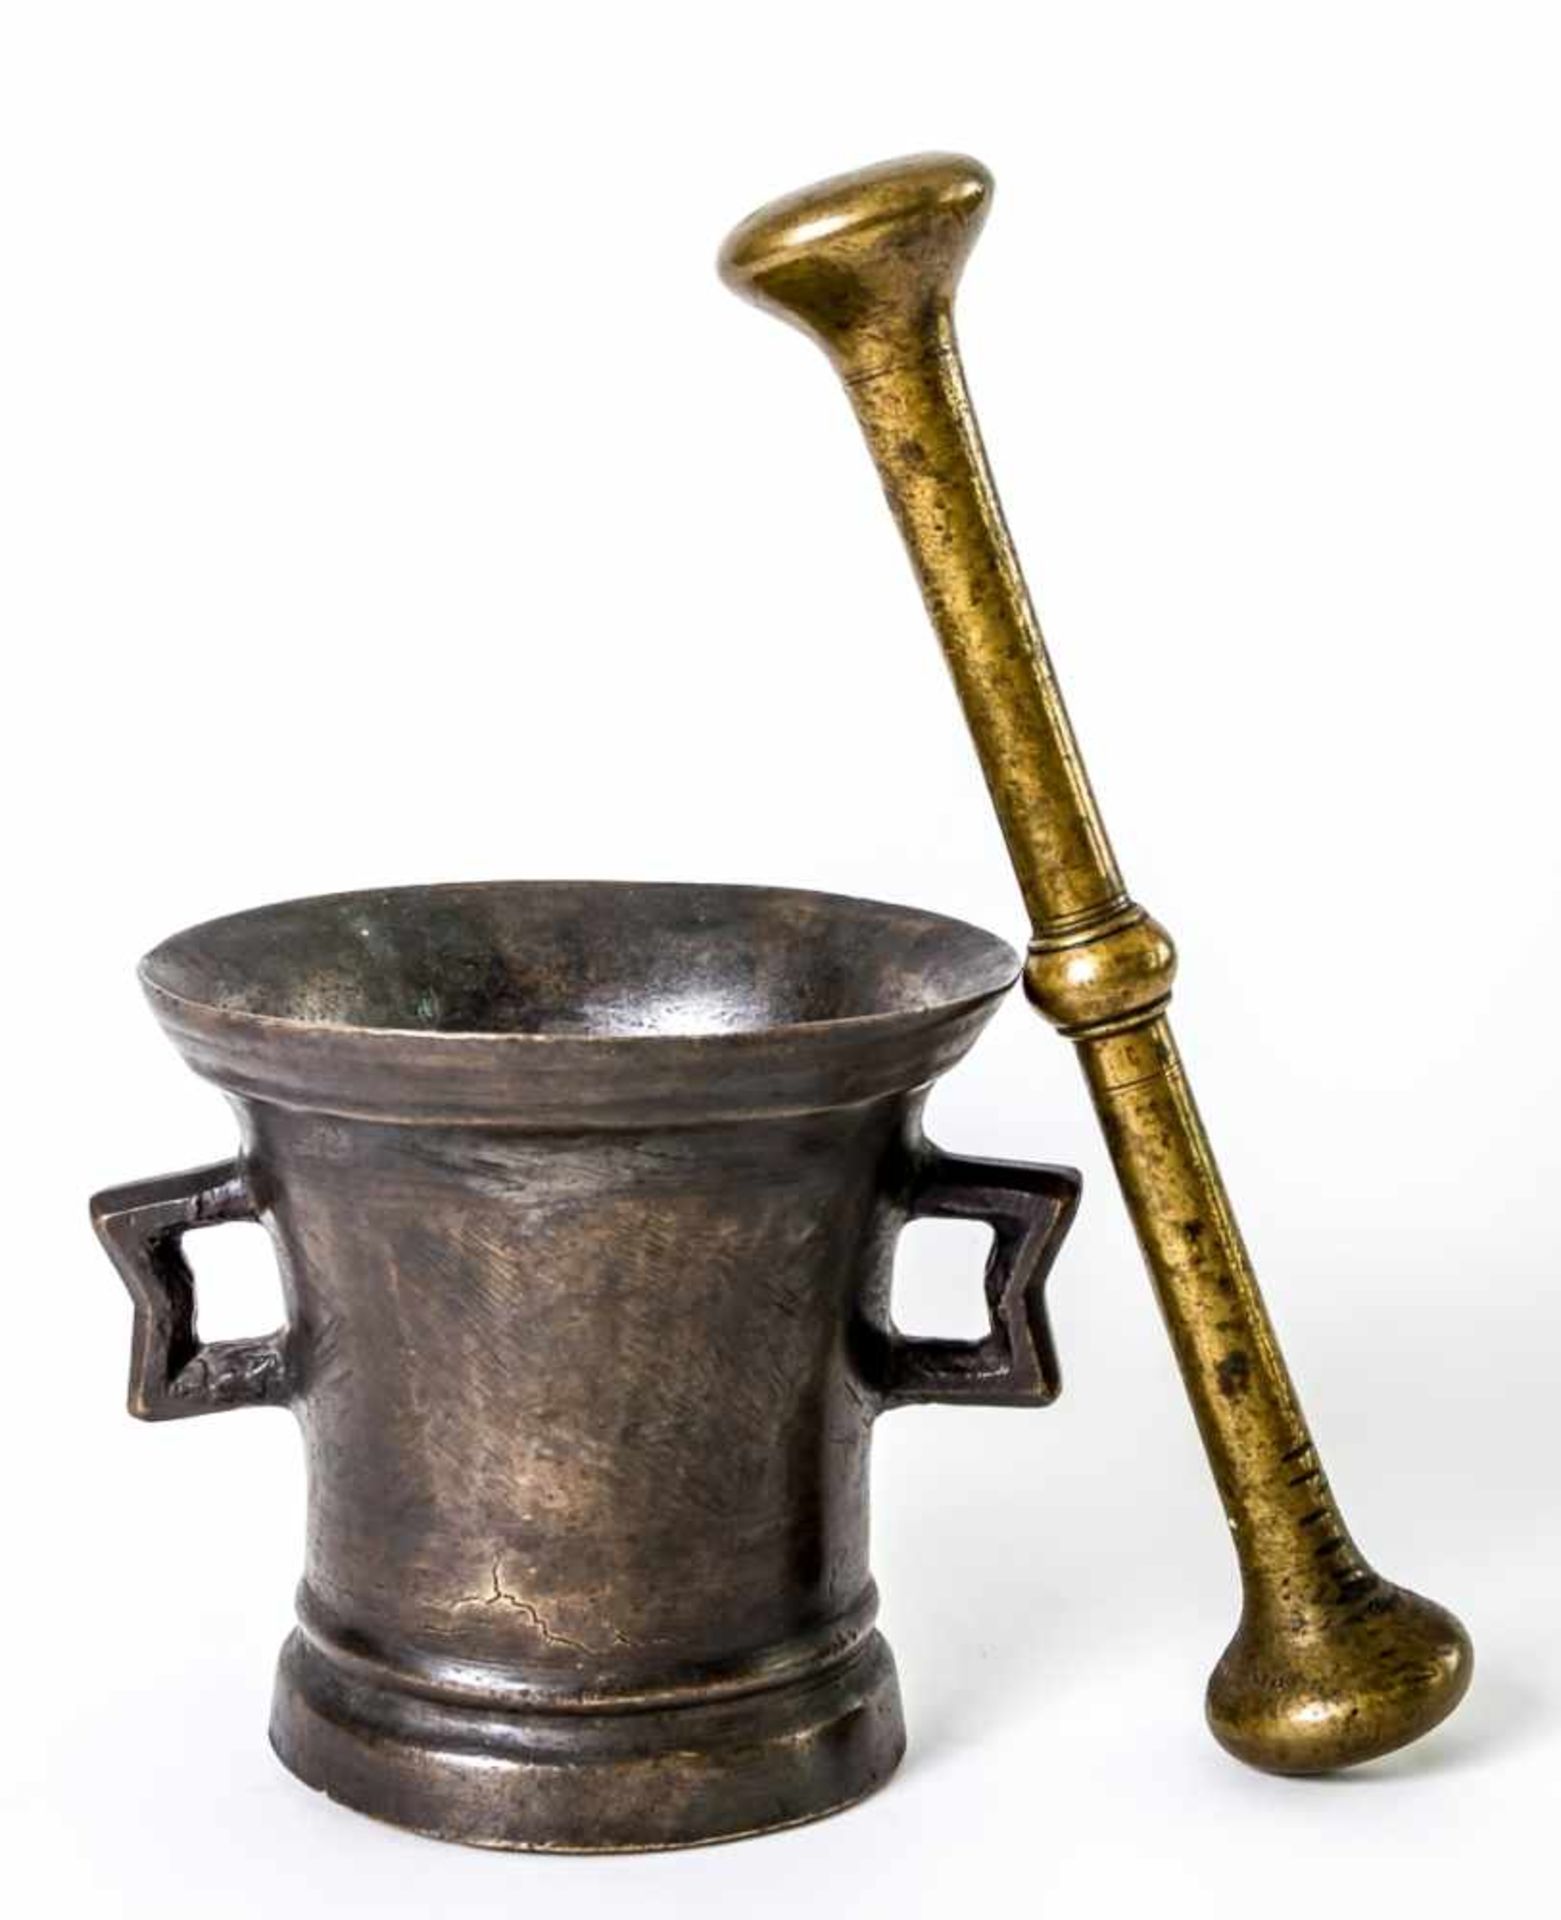 German mortar with pestle, bronze (3456g and 1176g), probably 17th century, D: 15,8 cm, H:14,7 cm,